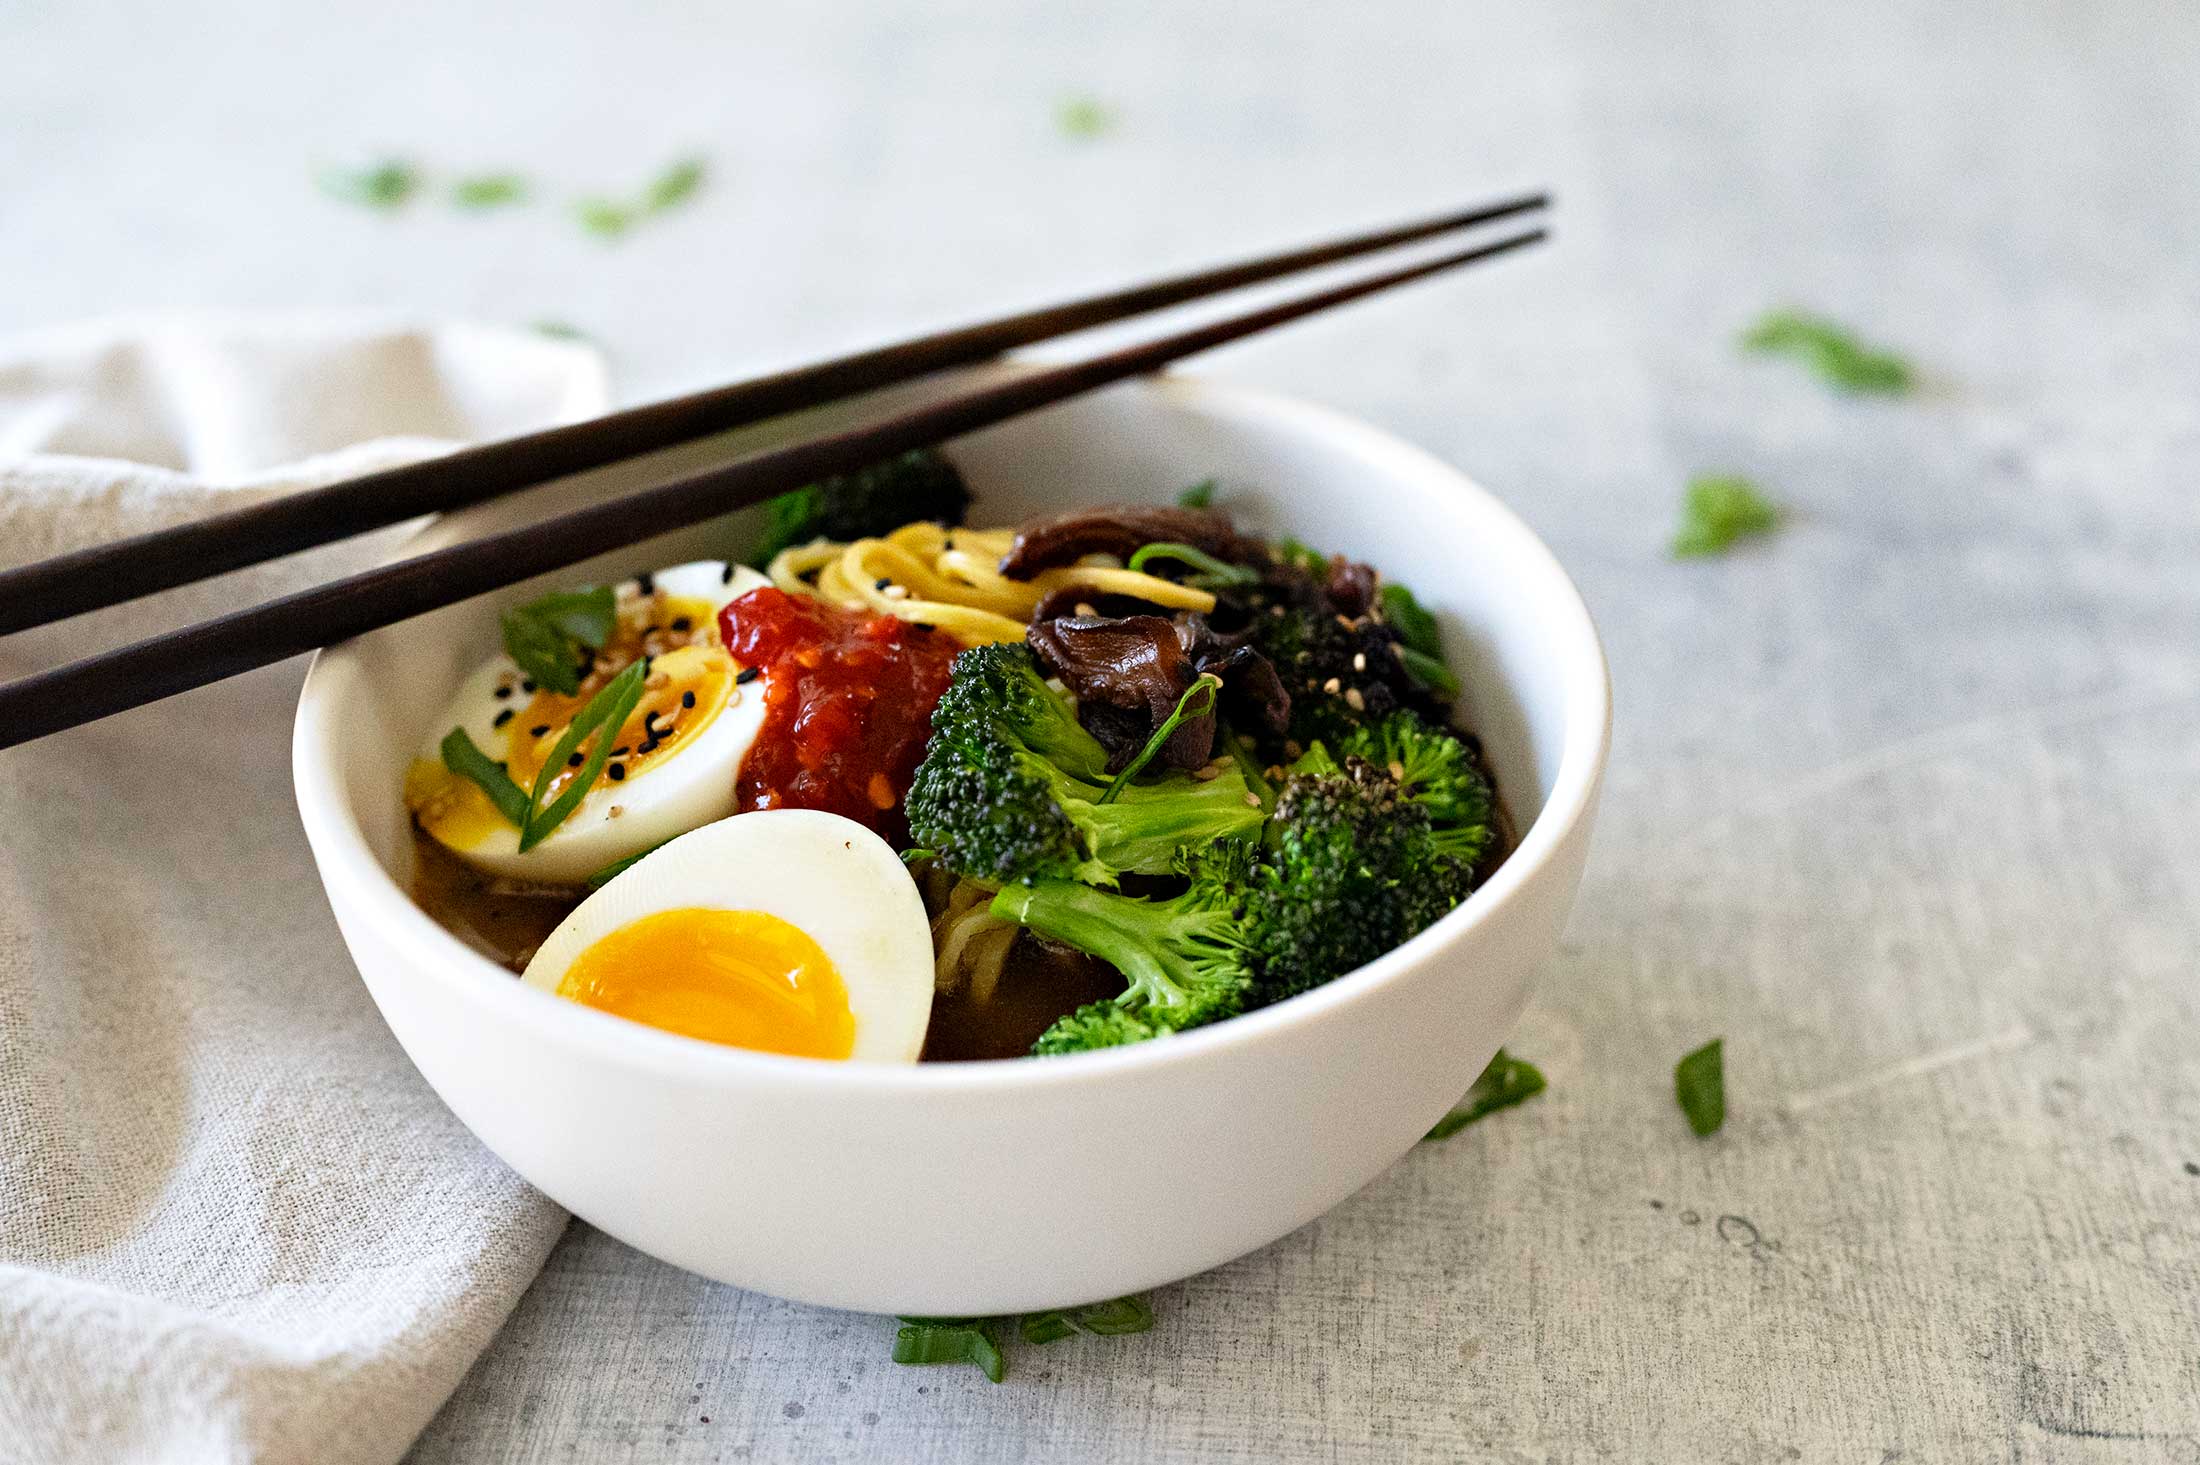 Easy Vegetarian Ramen Recipe for a Delicious Plant-Based Meal